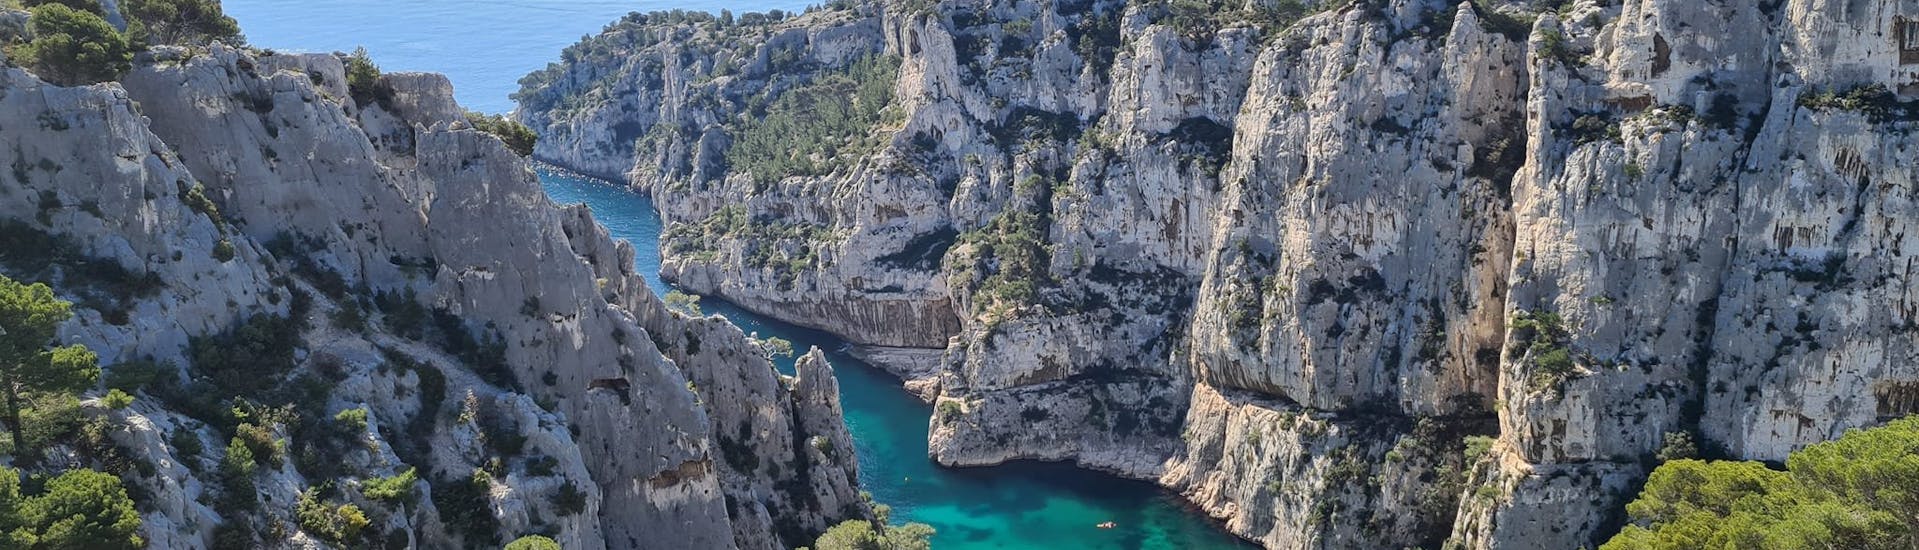 The beautiful calanque with its turquoise waters during the boat Trip to 7 Calanques of Cassis and Marseille from Bandol.